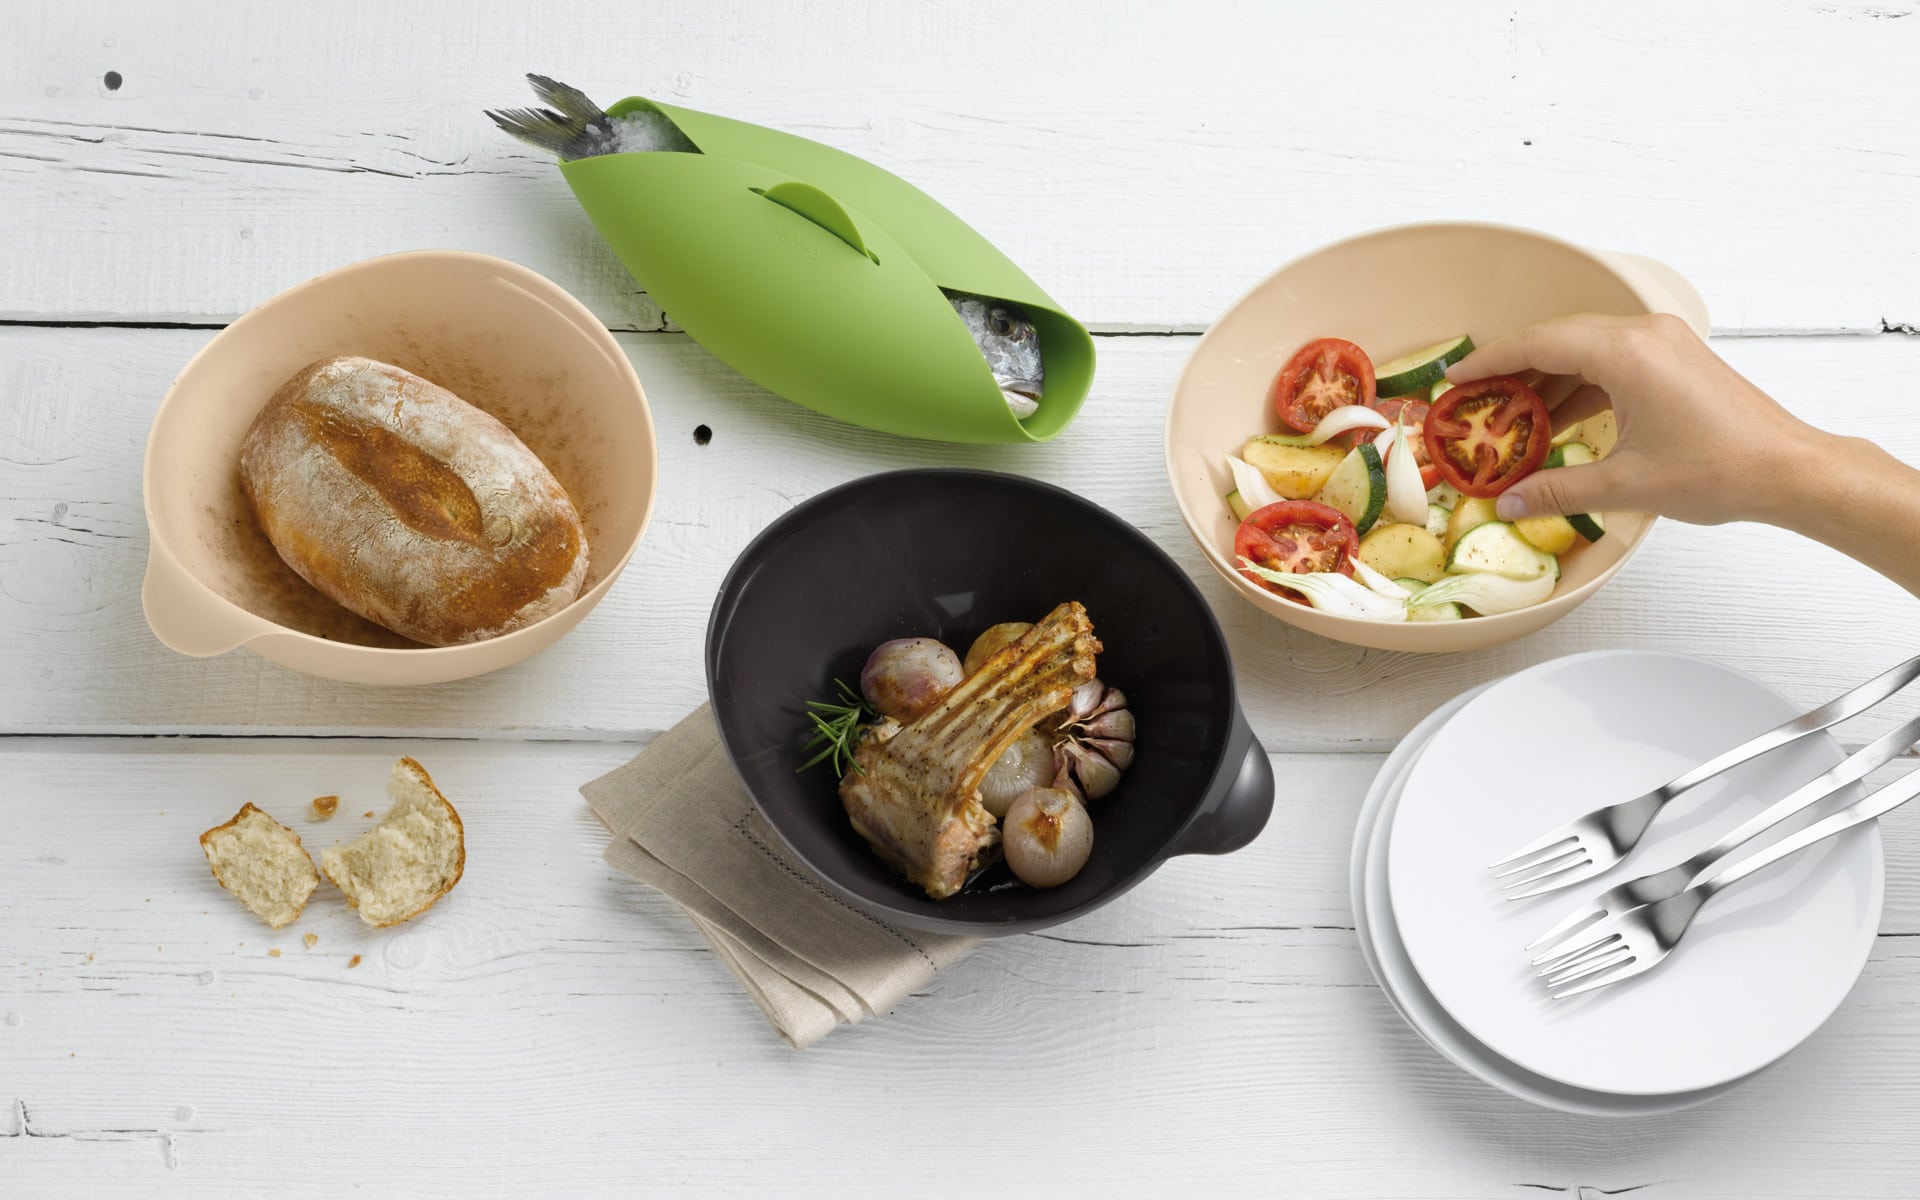 Table set with four silicone cooking bowls.